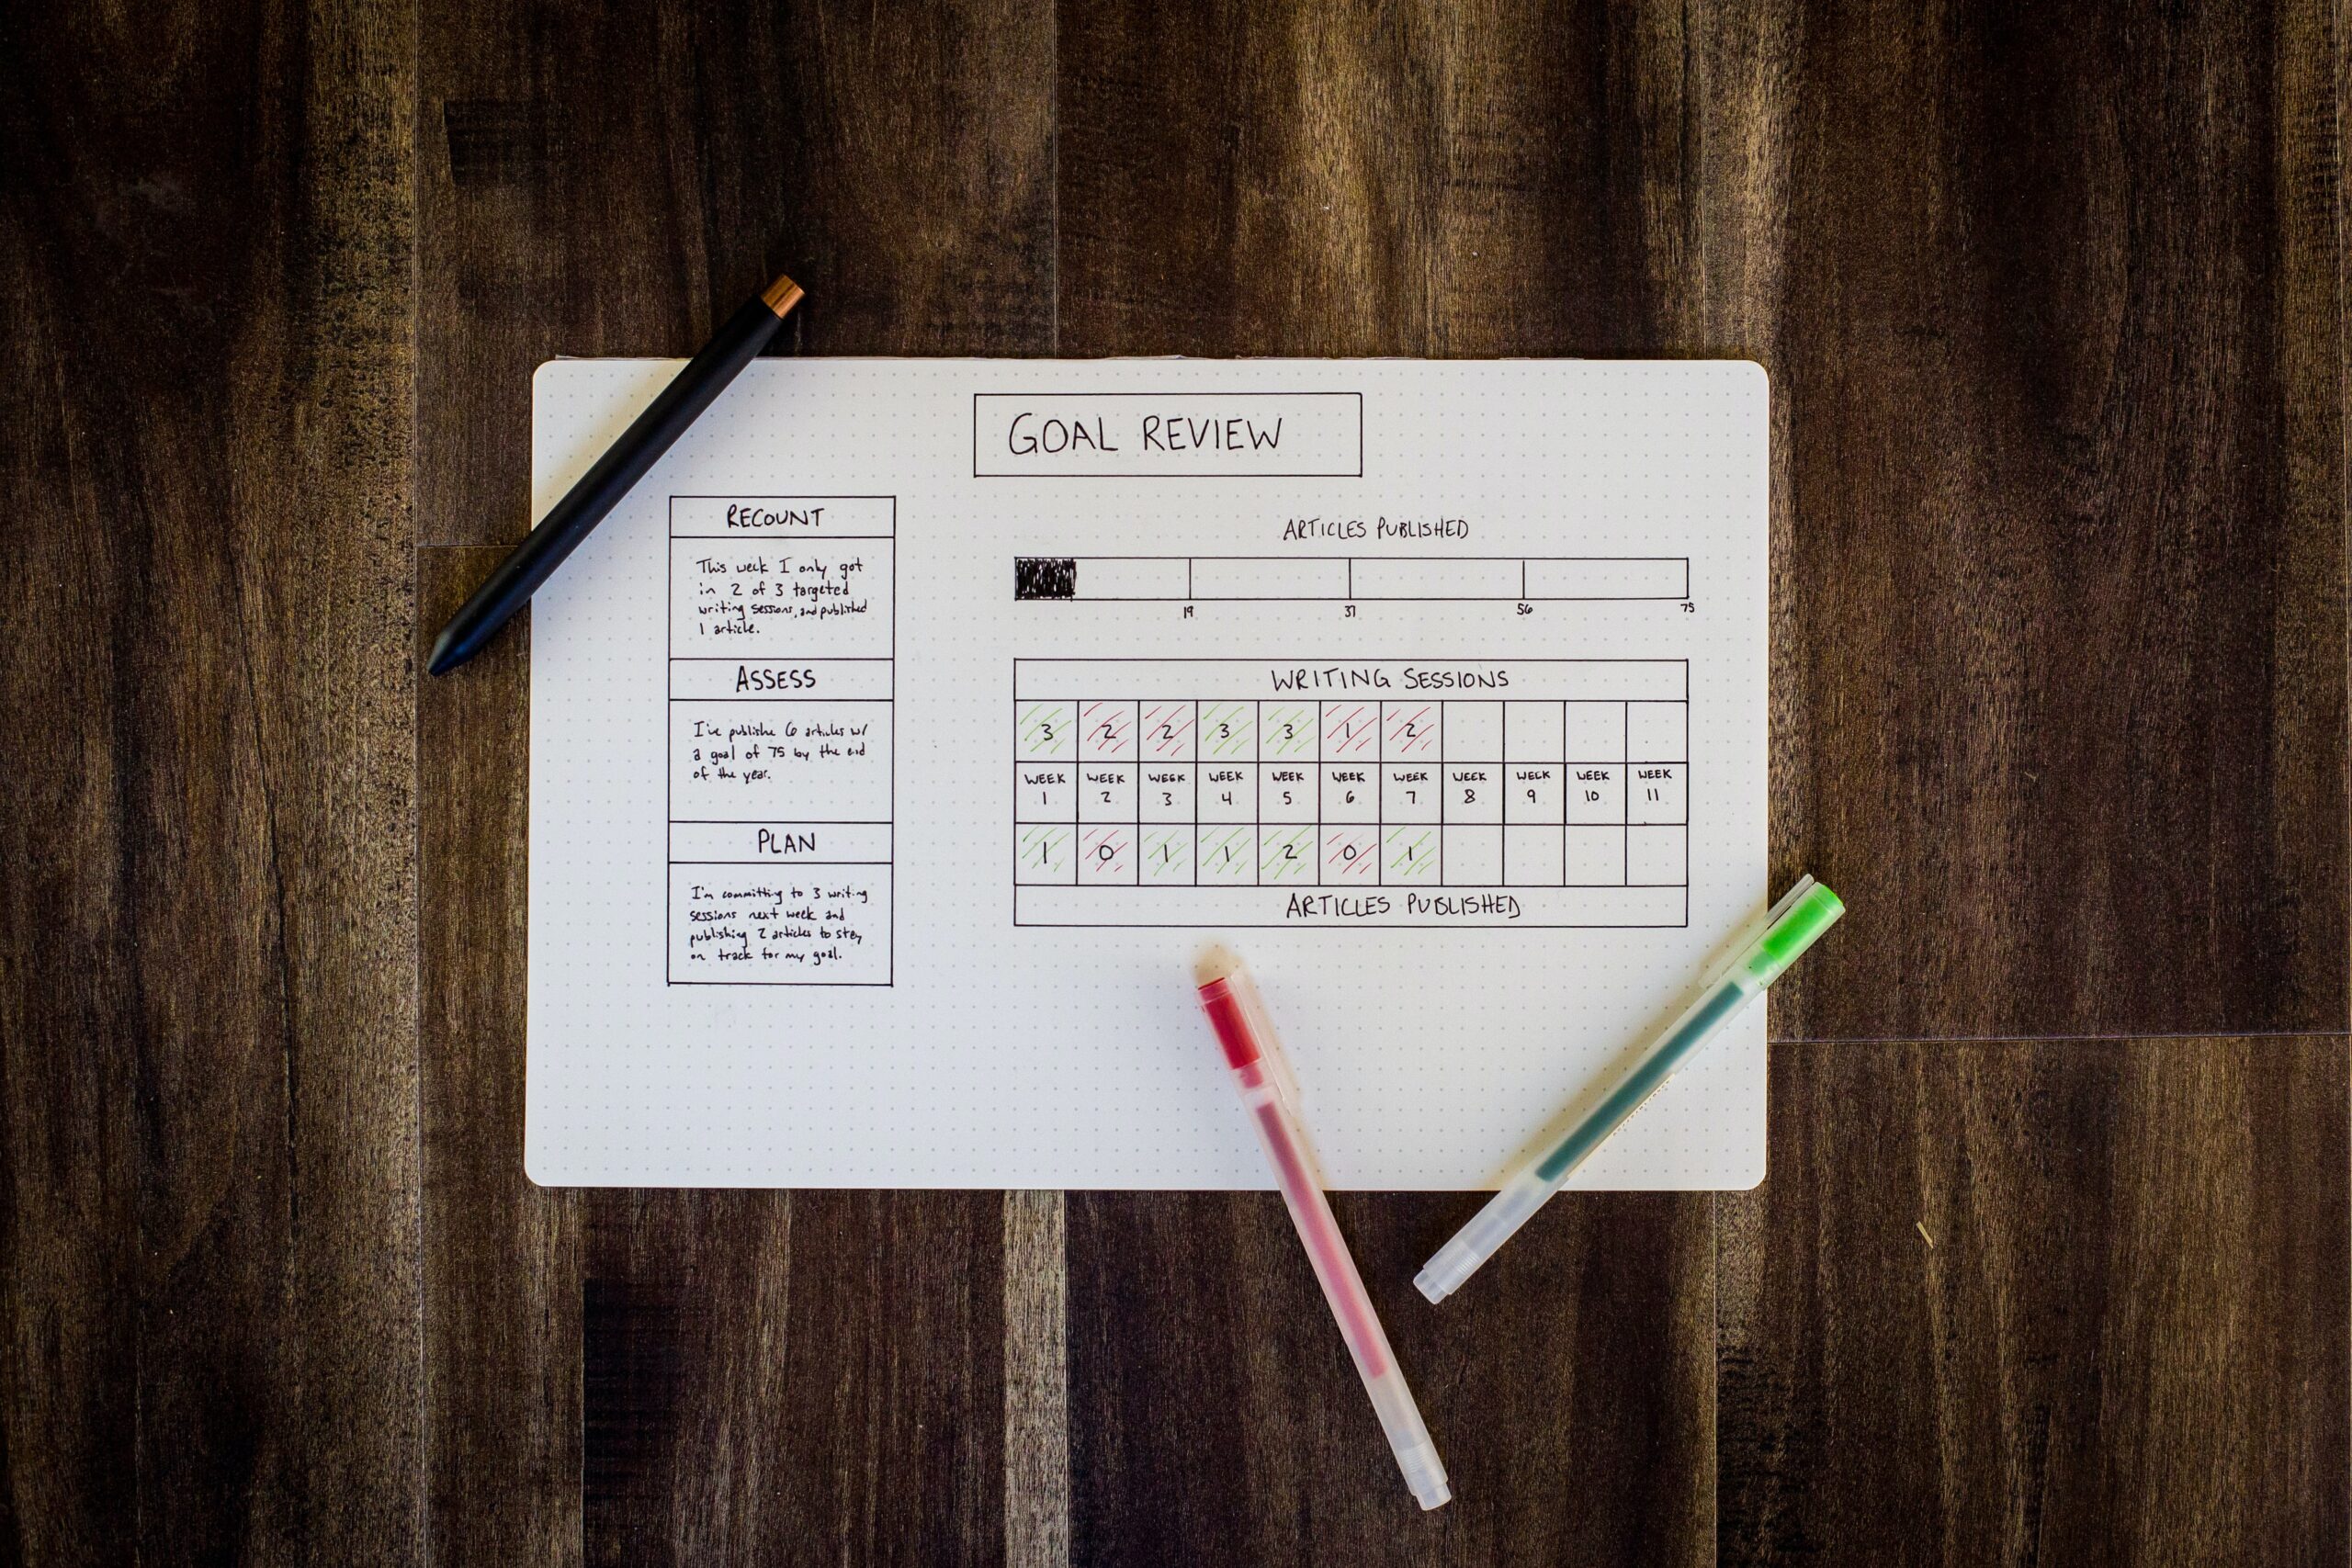 A new year planner on a wooden floor with markers